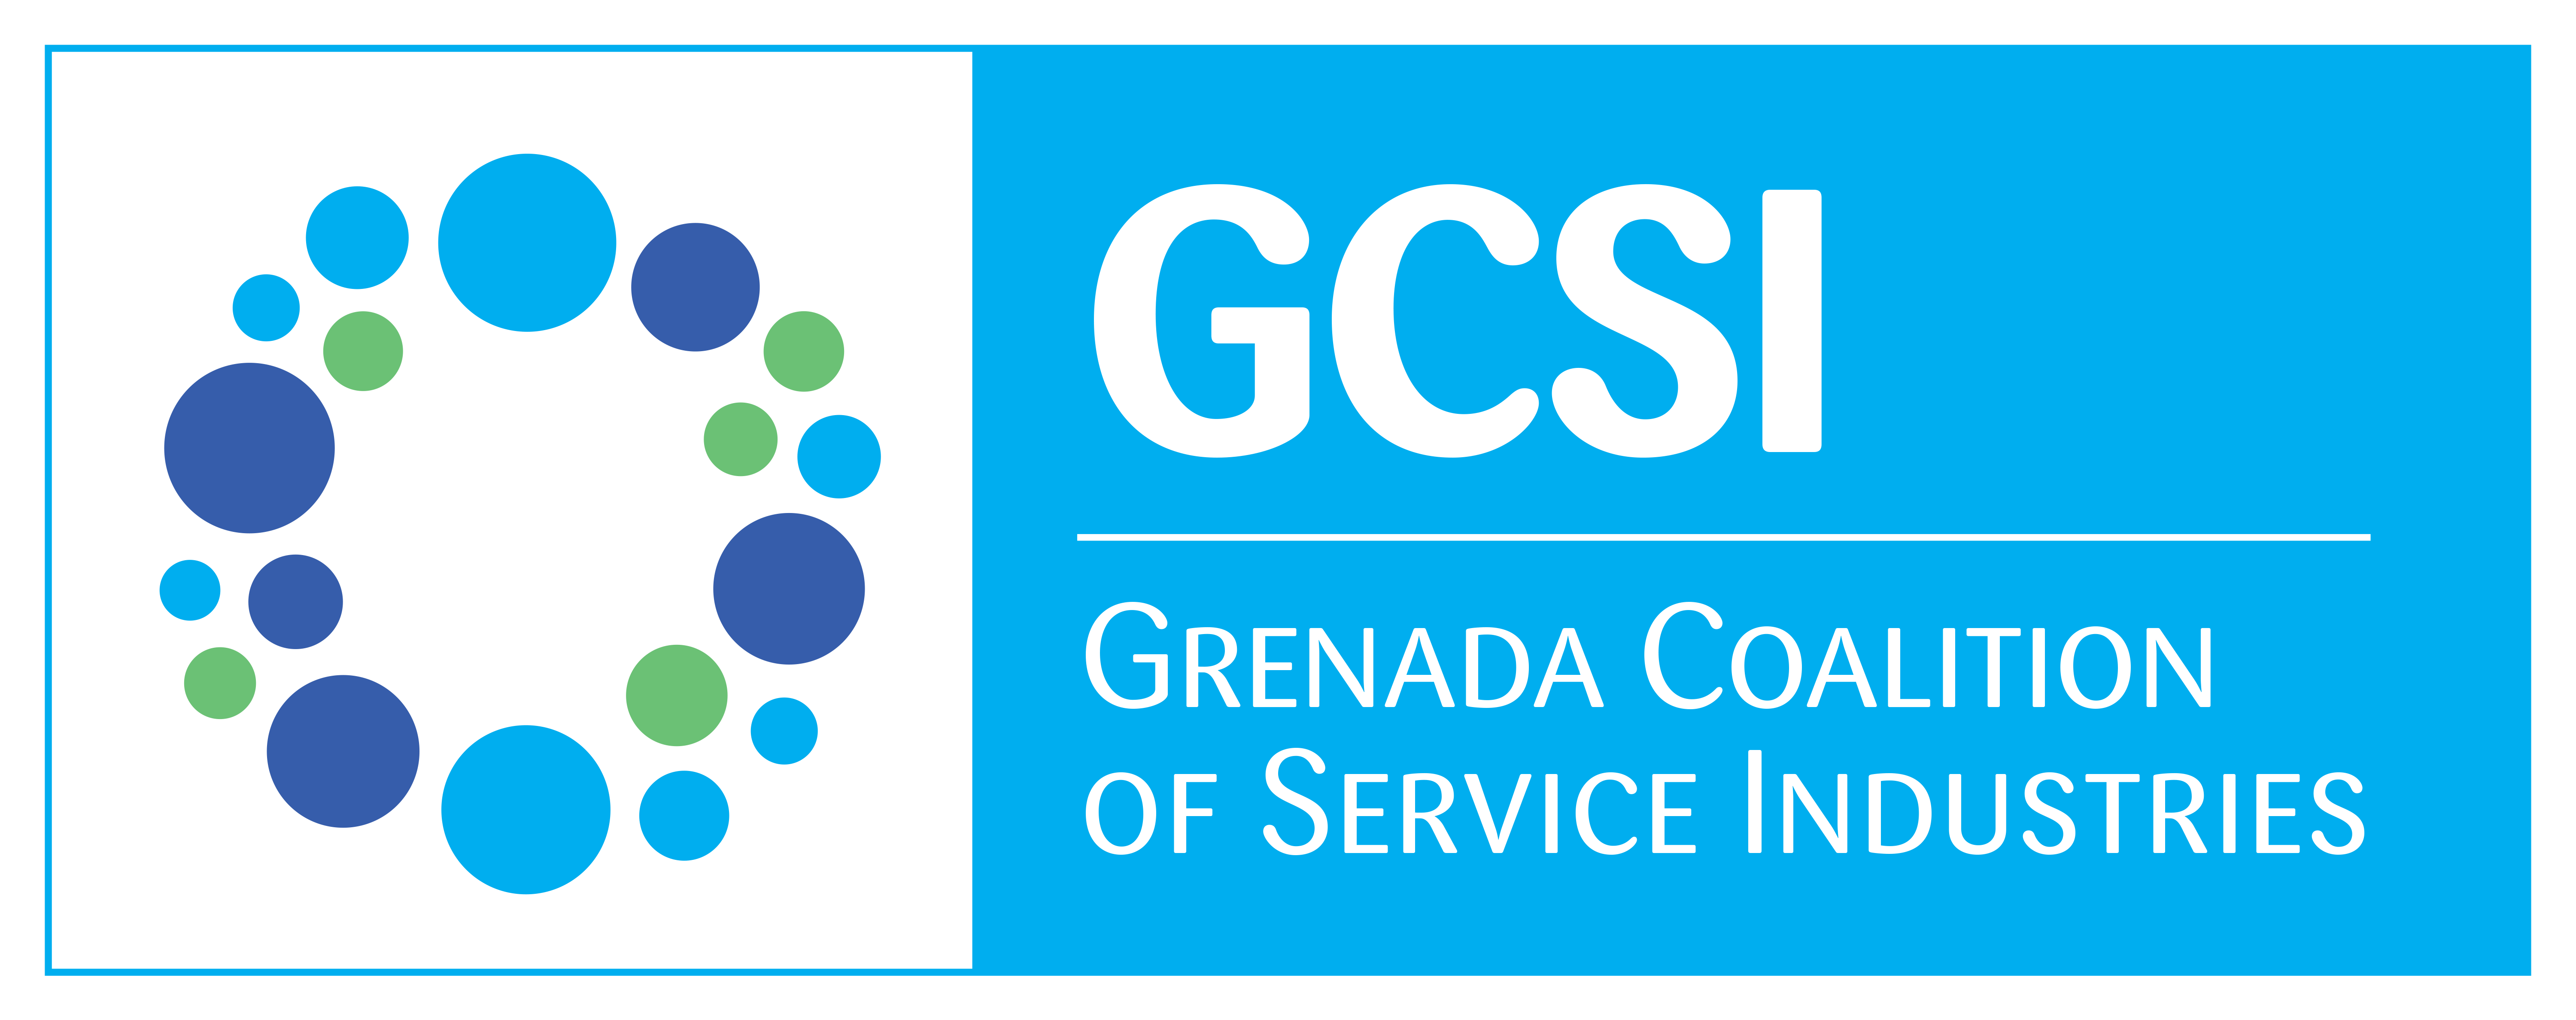 The Grenada Coalition of Service Industries